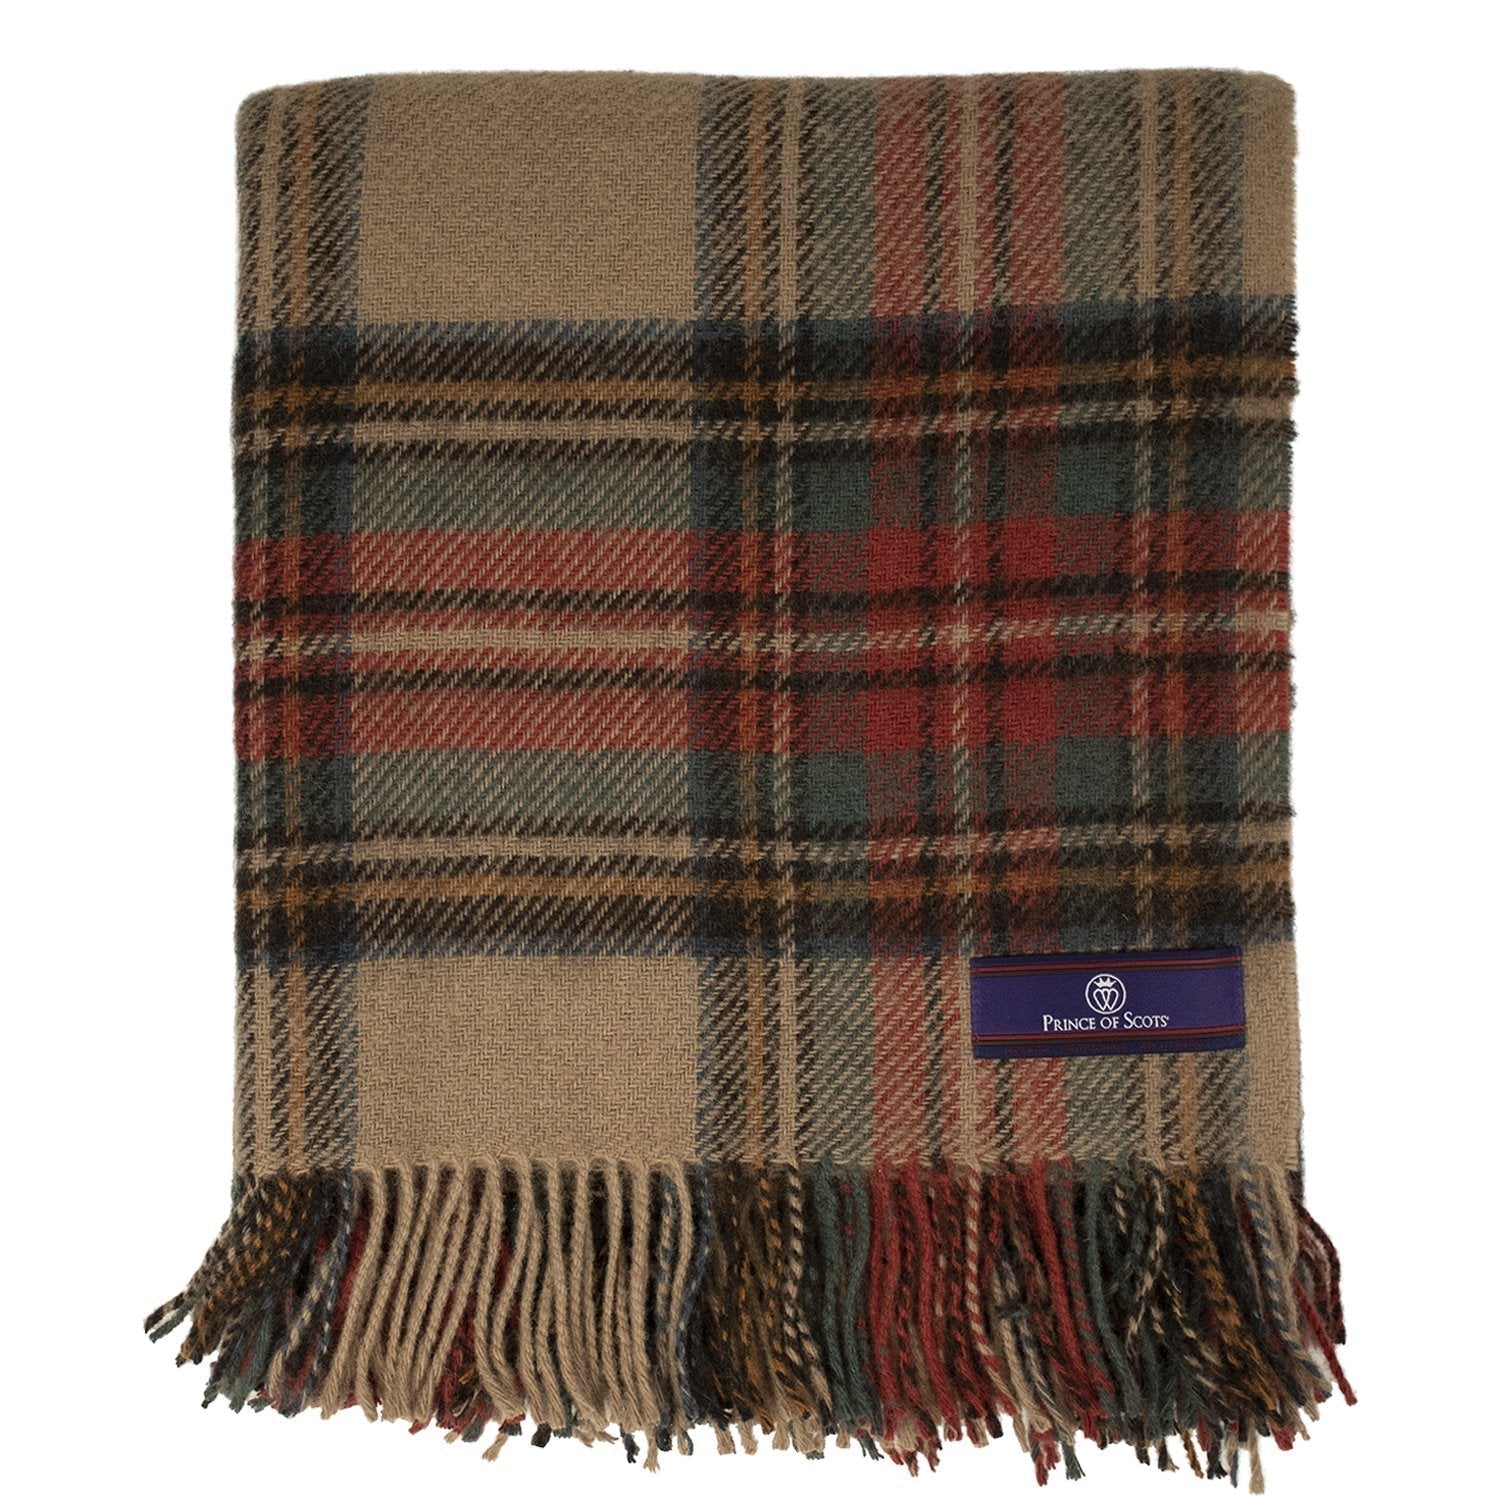 Prince of Scots Highland Tweed Pure New Wool Throw (Antique Dress Stewart)-Throws and Blankets-Prince of Scots-810032752033-J4050028-15-Prince of Scots